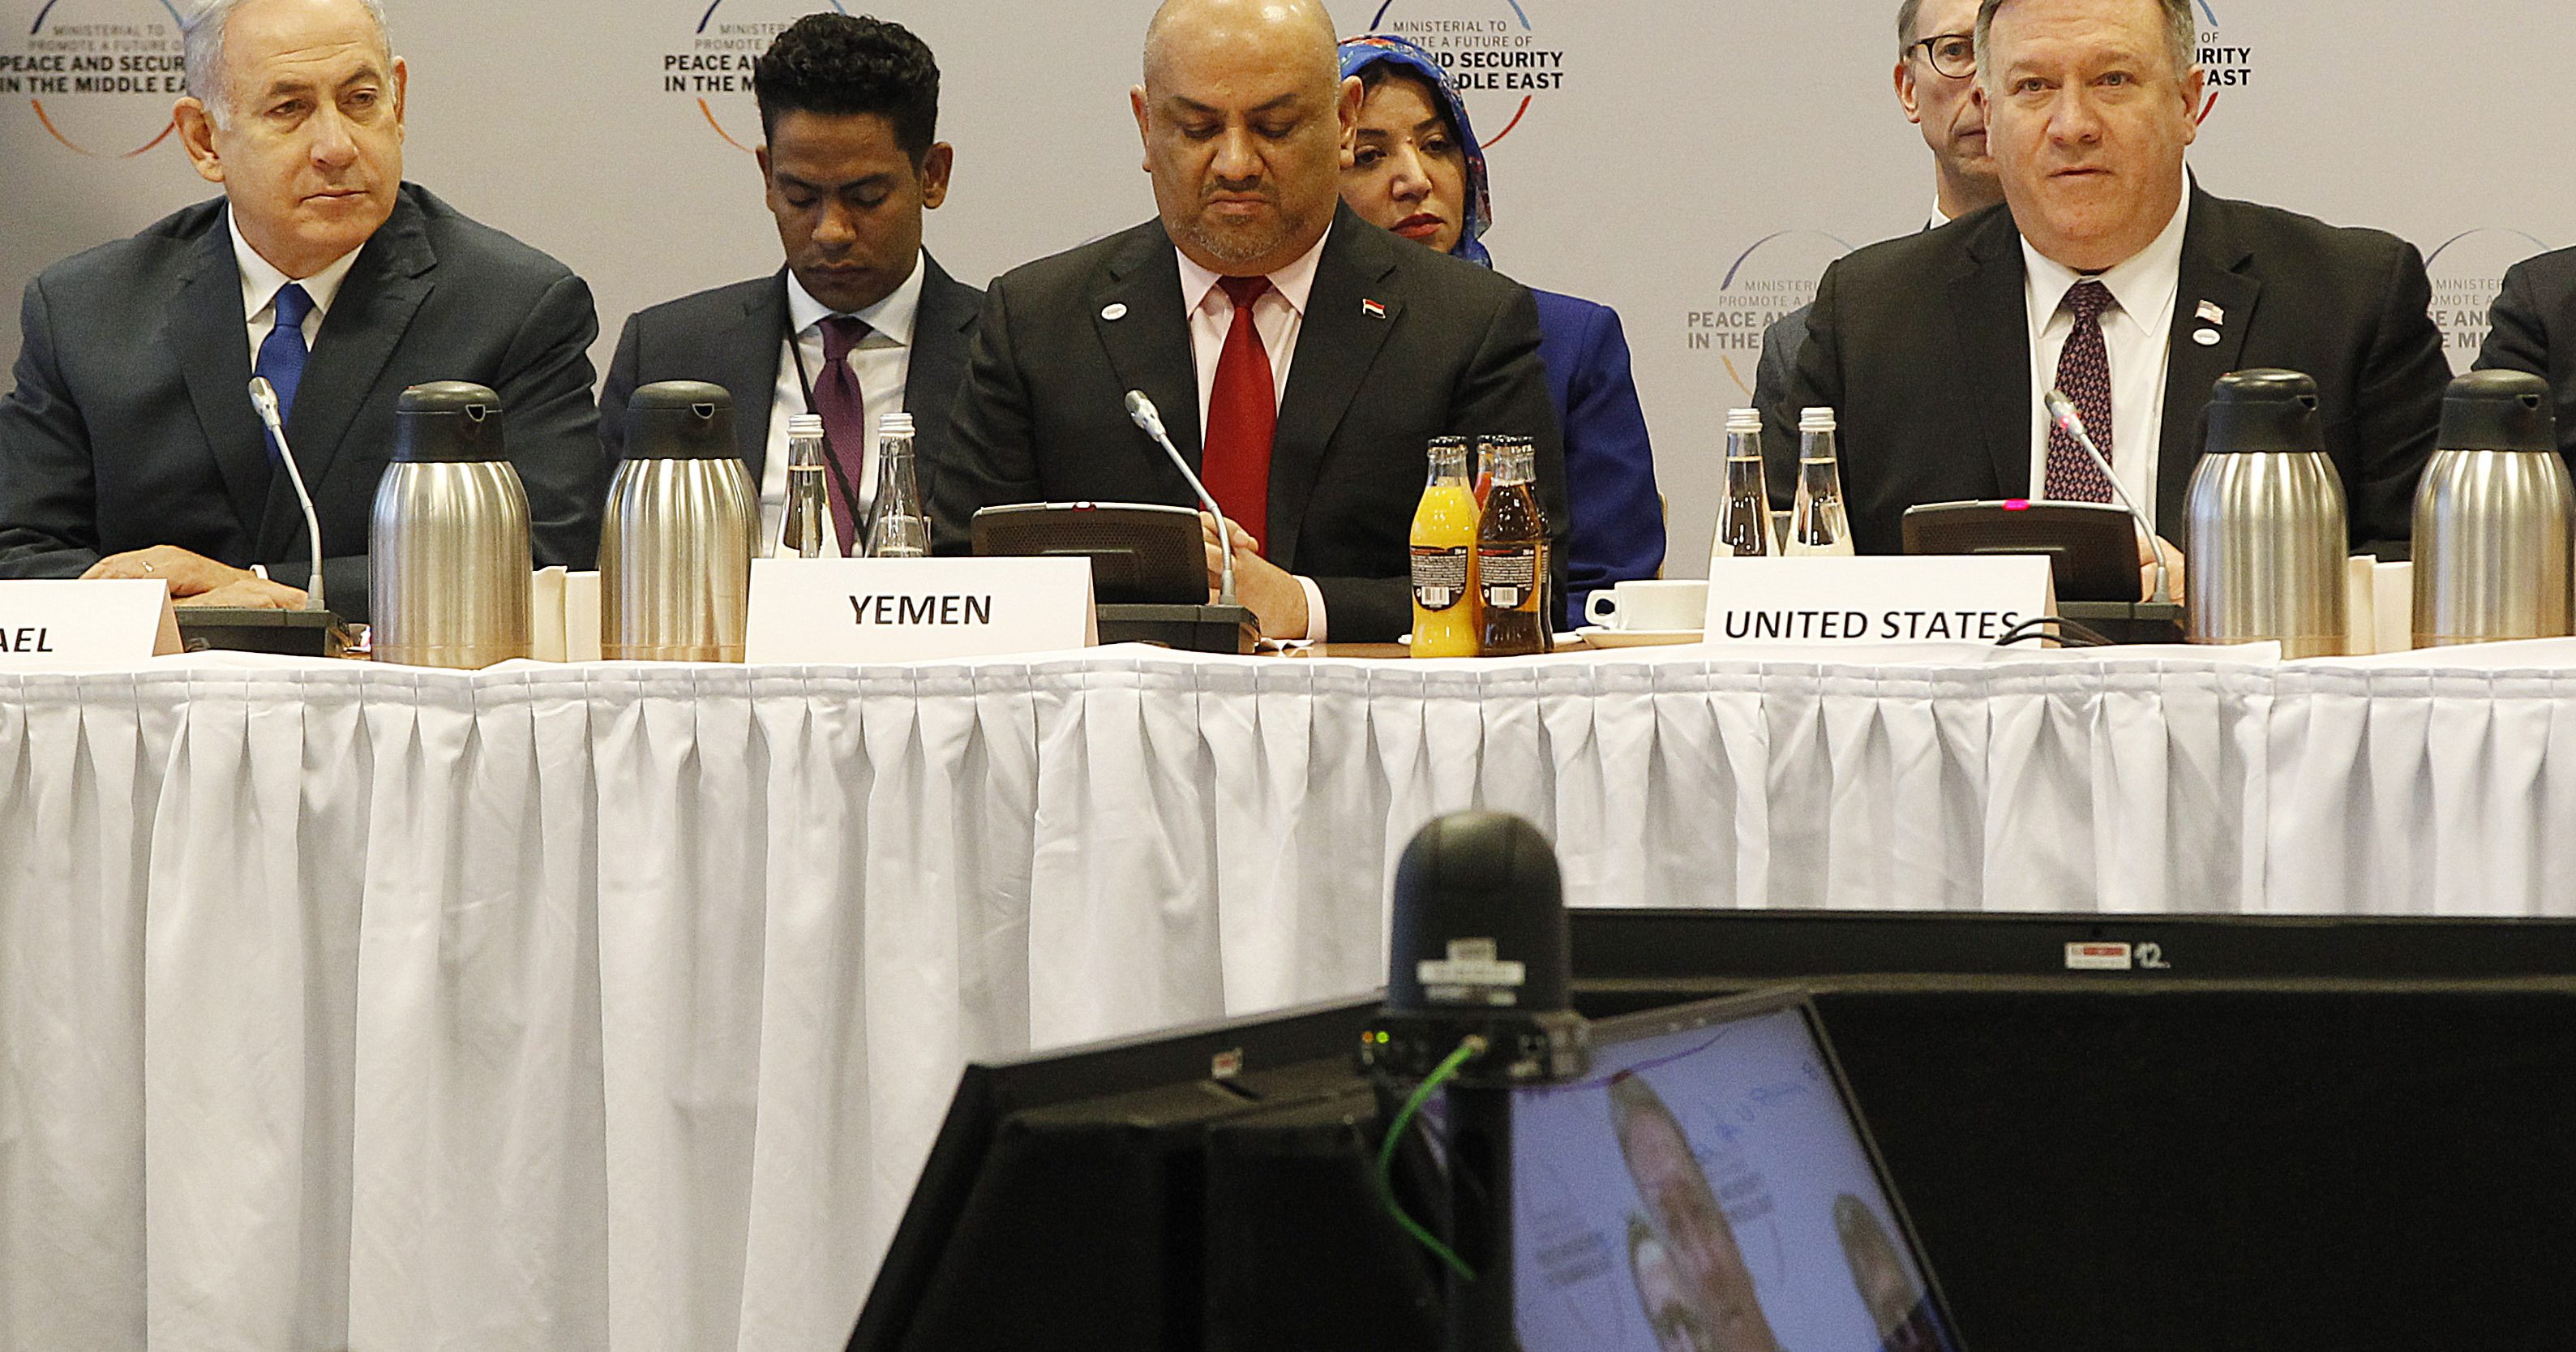 From left, Israeli Prime Minister Benjamin Netanyahu, Yemen's Foreign Minister Khalid al-Yamani and US Secretary of State Mike Pompeo attend a session at the conference on Peace and Security in the Middle east in Warsaw, Poland, Thursday, Feb. 14, 2019.